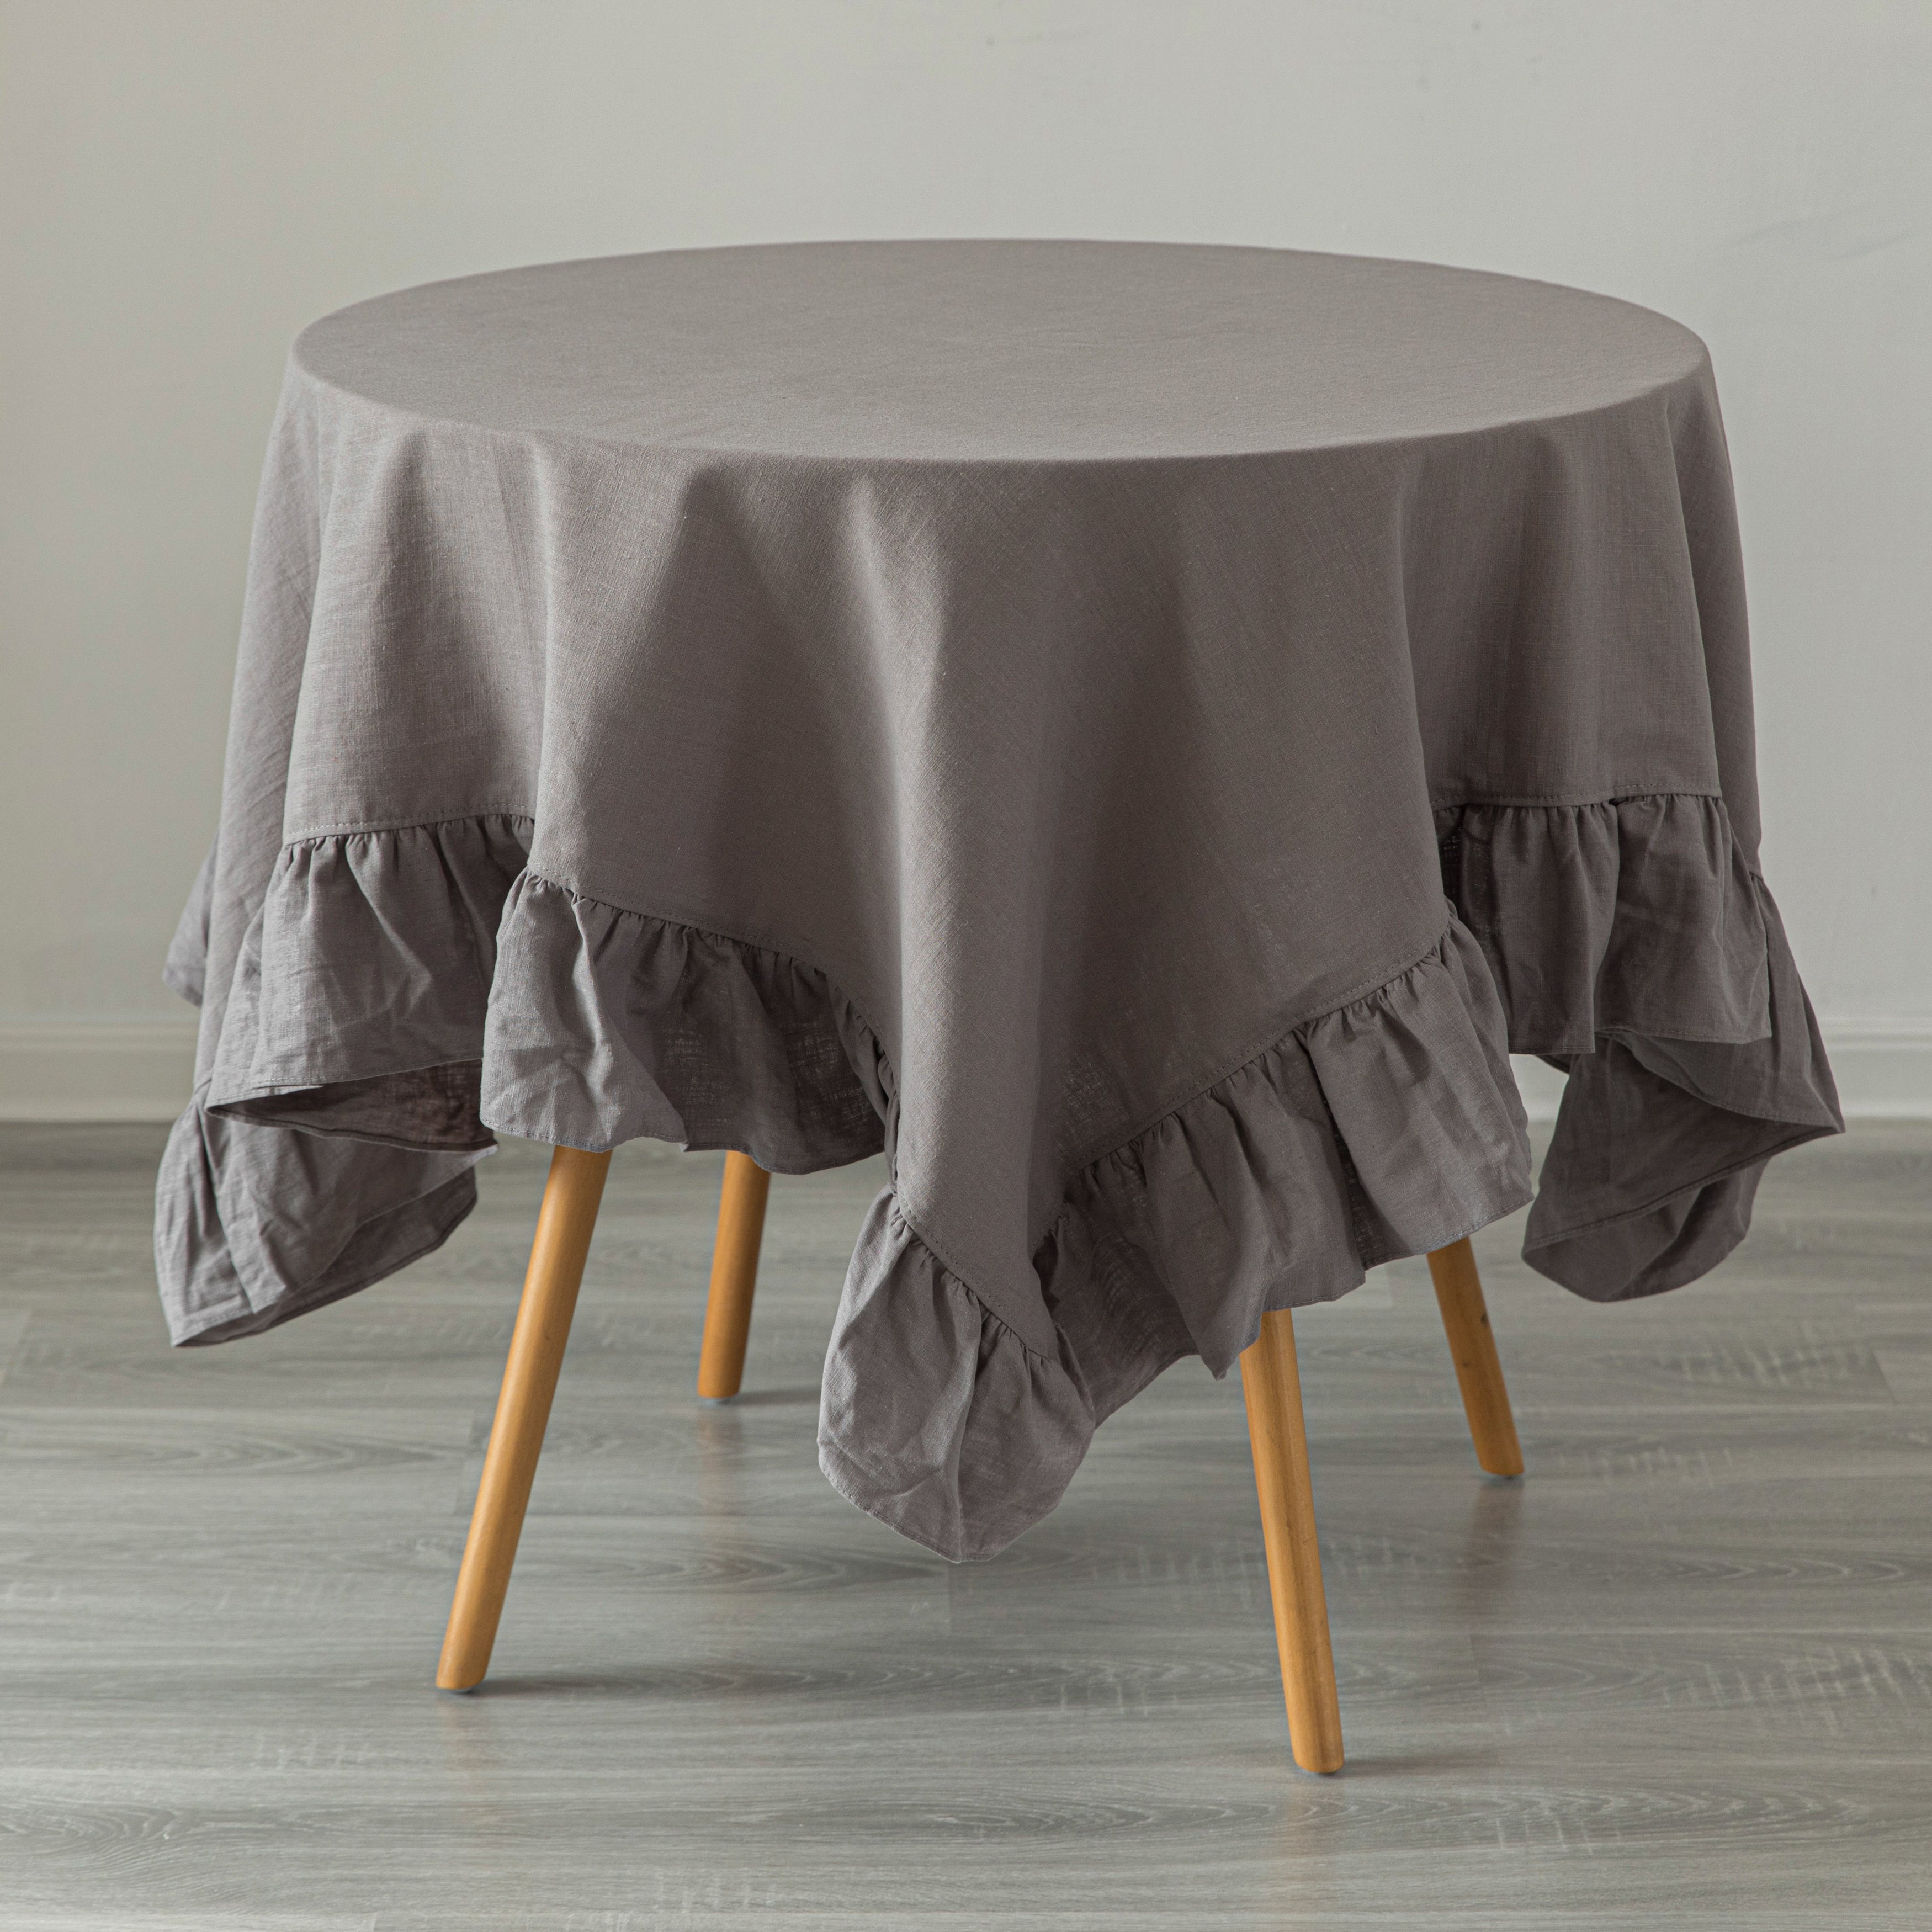 Deerlux 100 Percent Pure Linen Washable Tablecloth With Ruffle Trim - 60 X 60 In. White